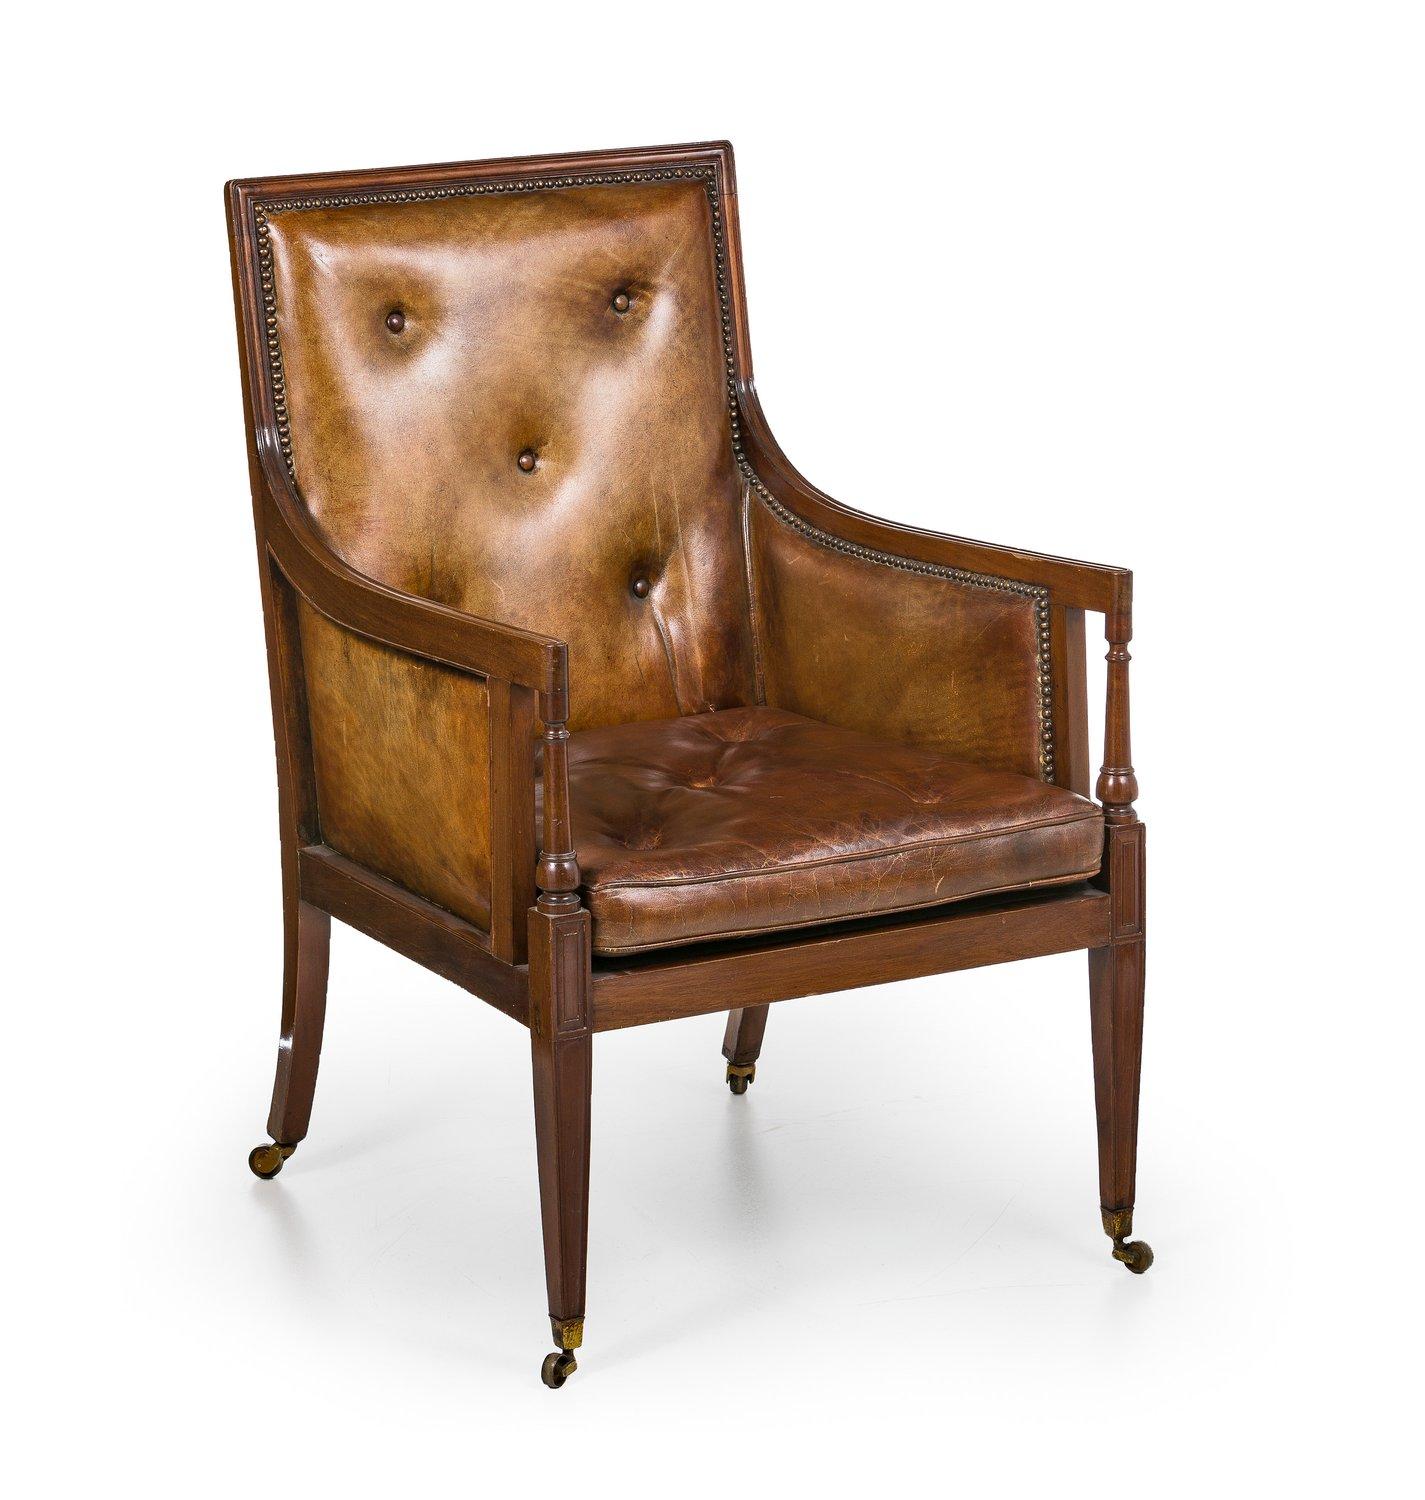 Lounge chair
England
Mahogany. Simple profiled frame with high backrest and armrest with column supports. Leather upholstery and leather cushions. On brass casters.

                    